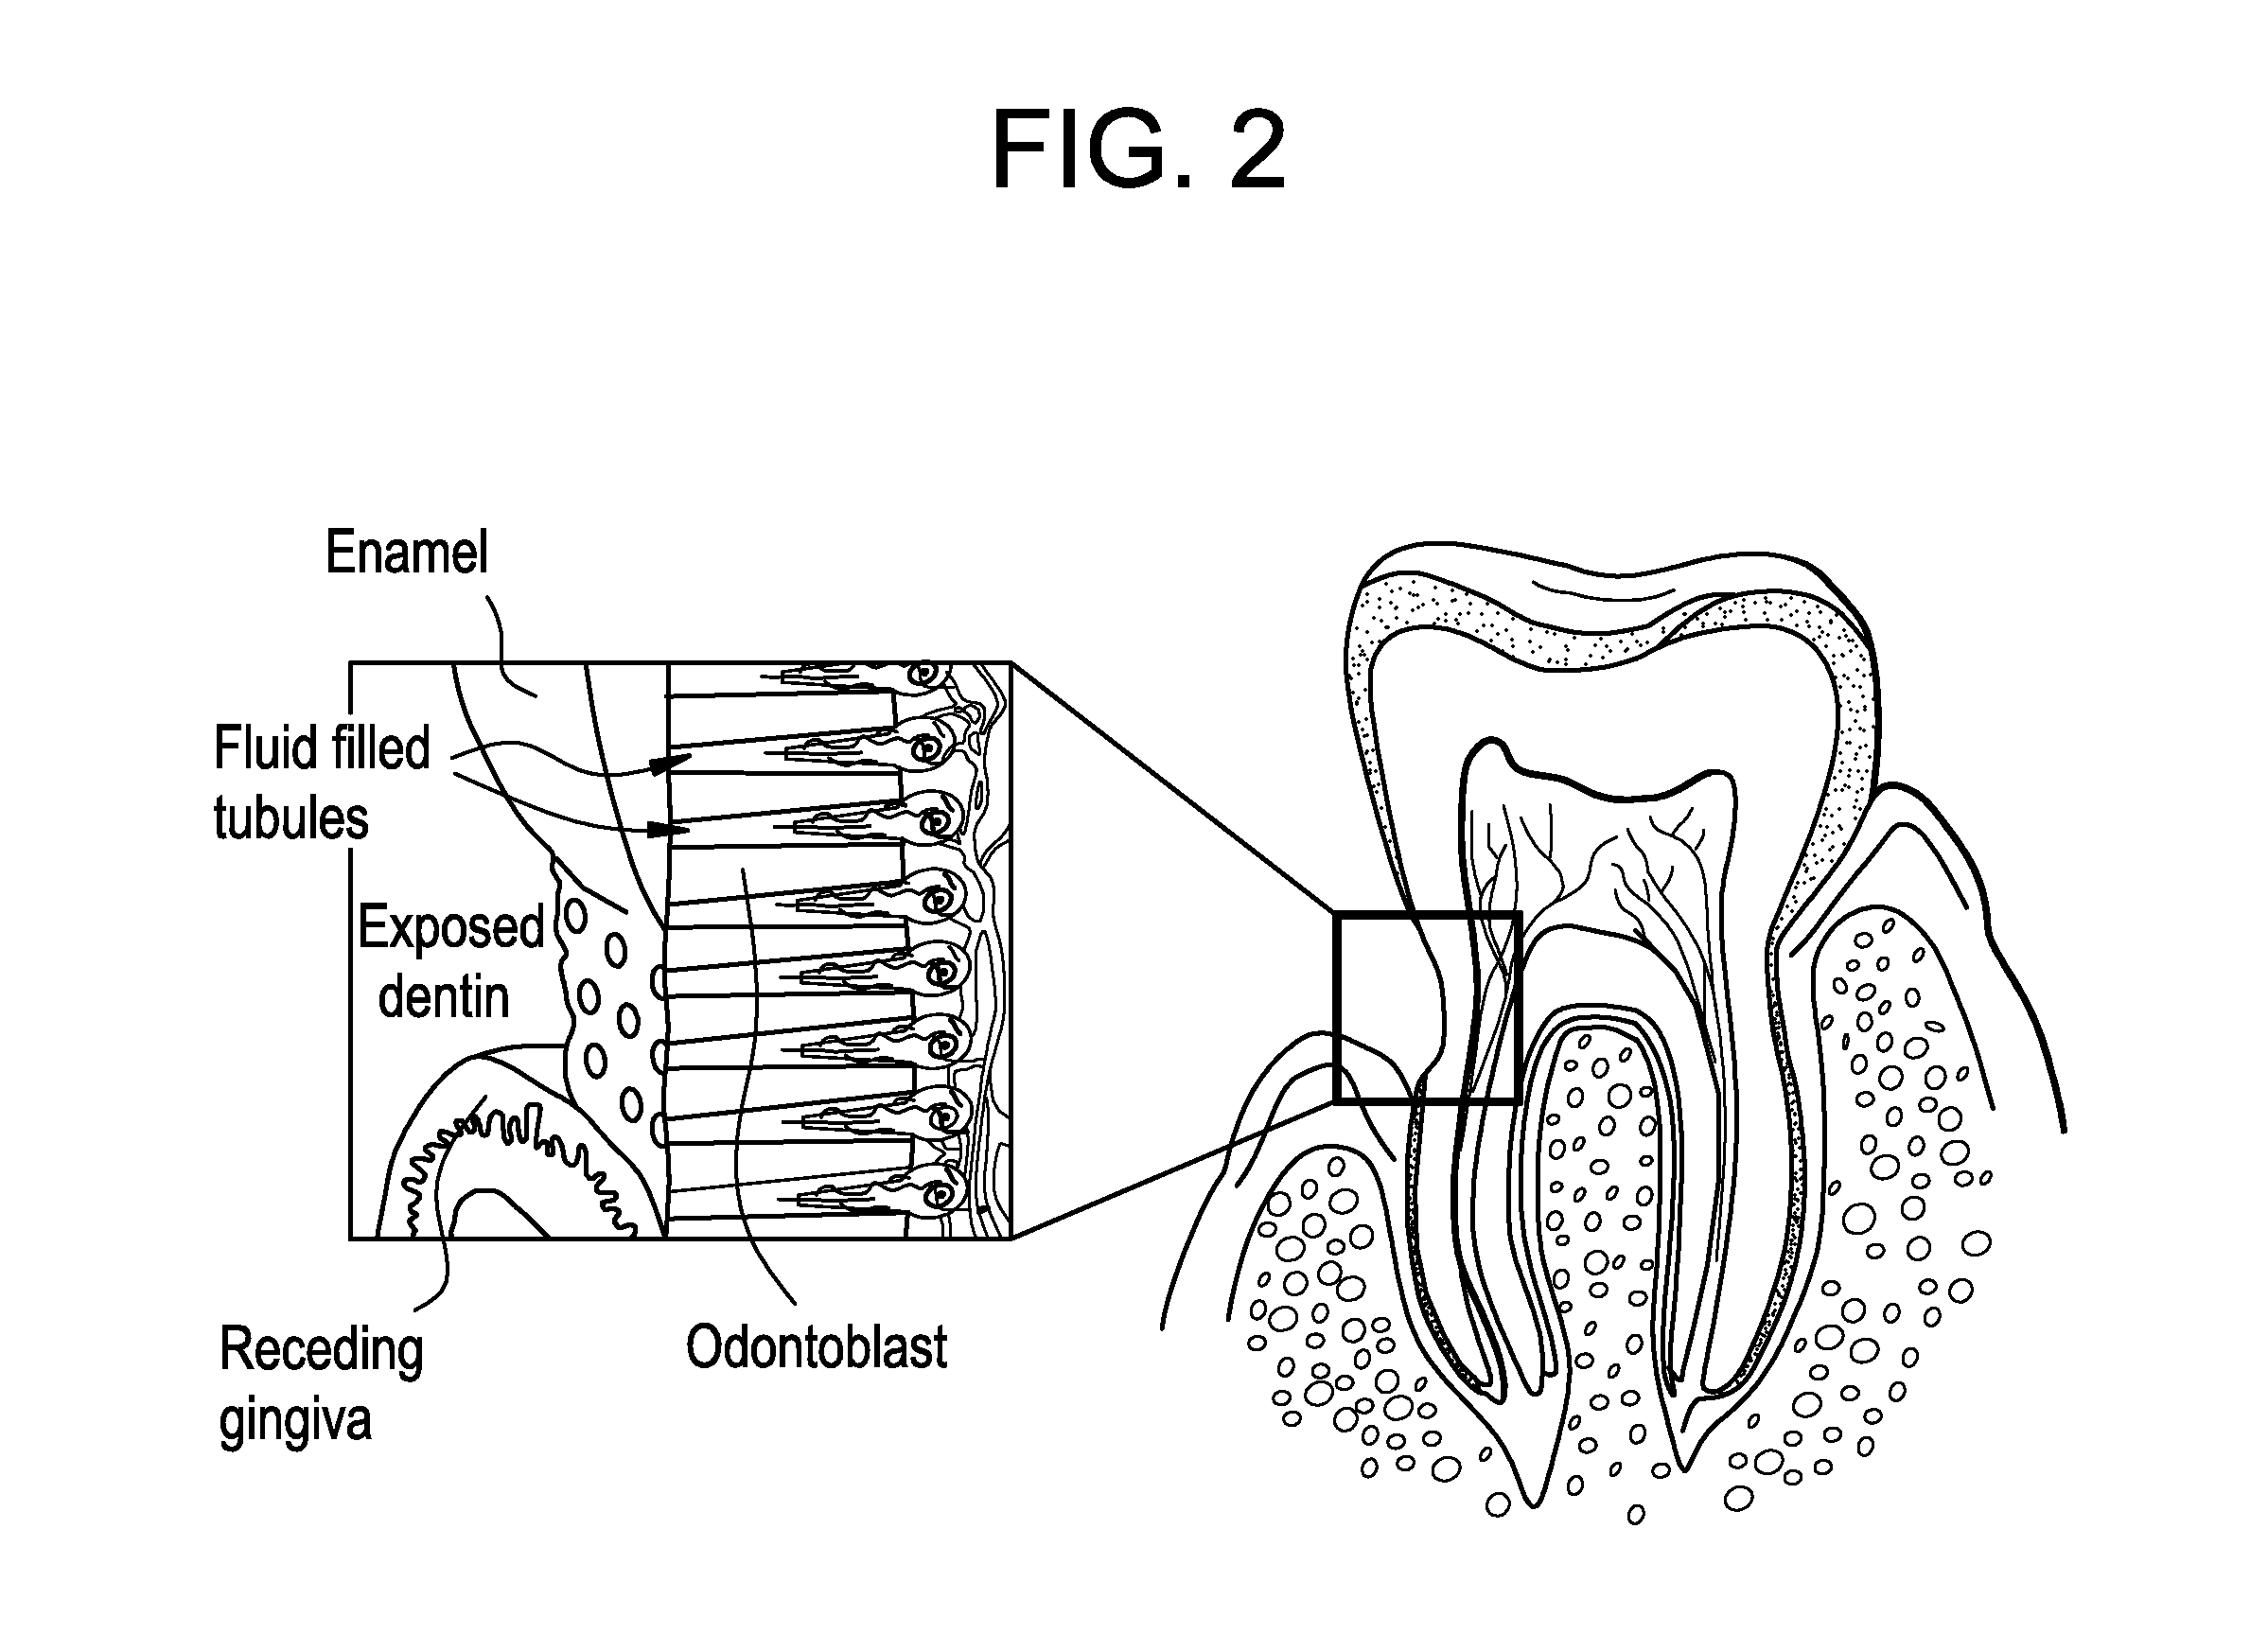 Oral care compositions for treatment of sensitive teeth